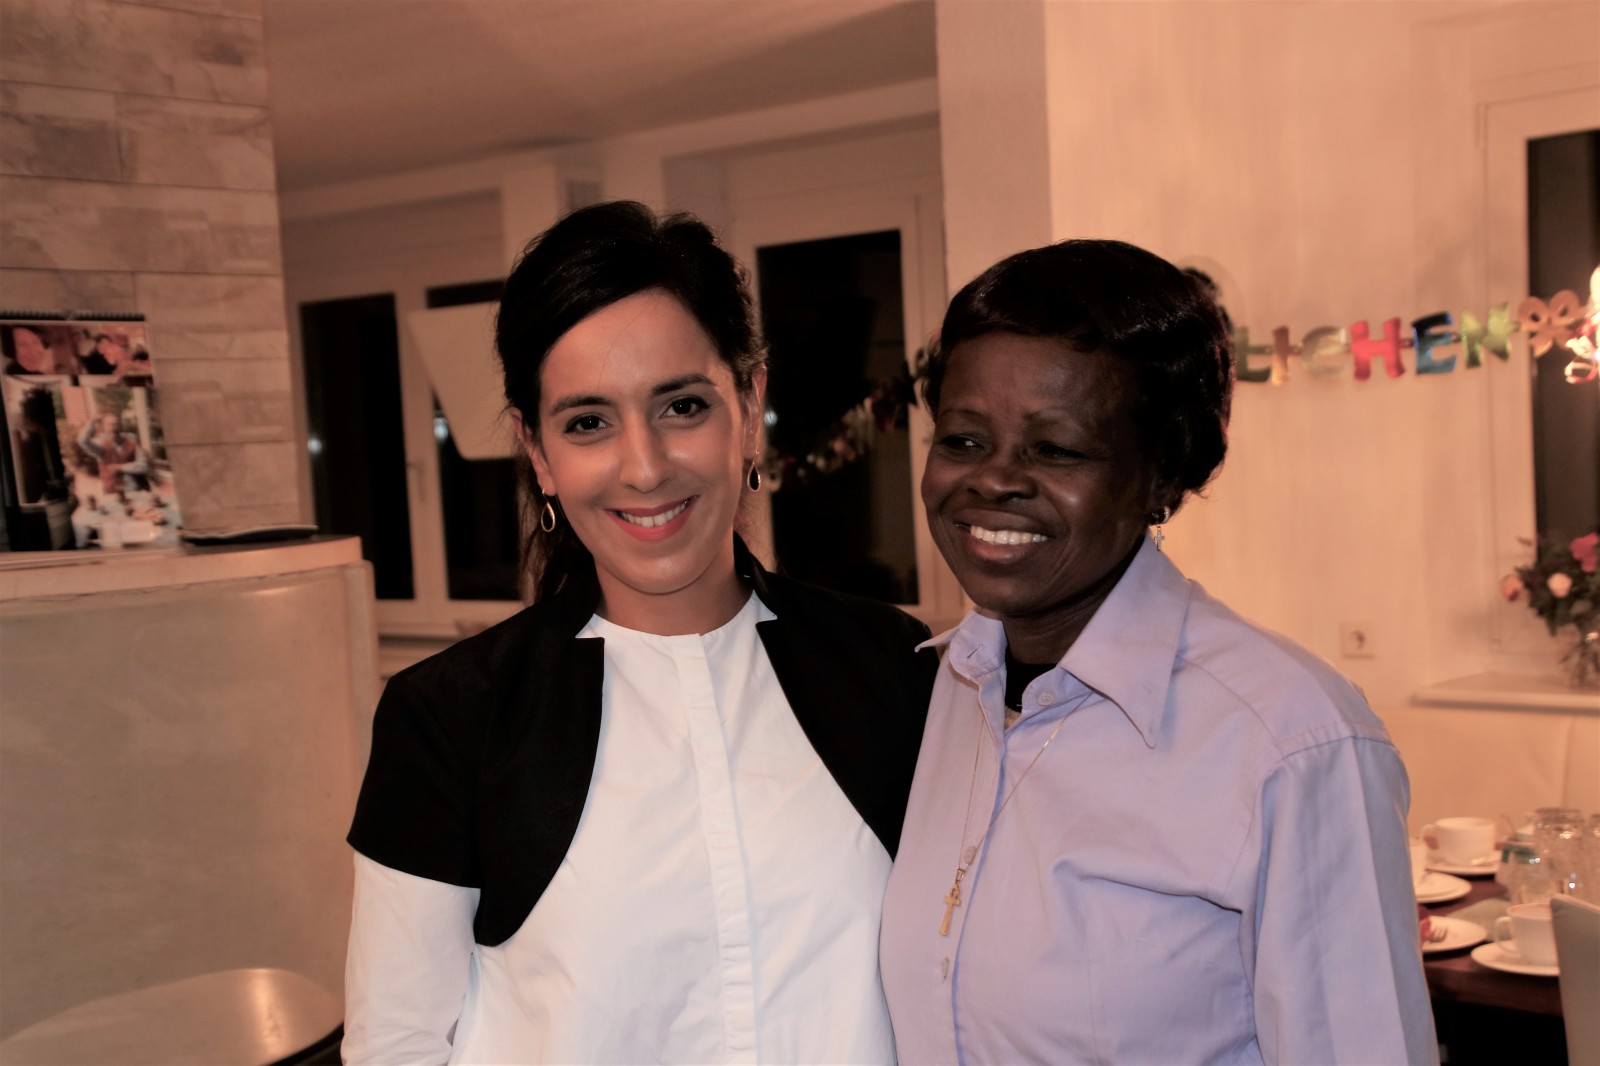 Member Of Regional Parliament Nese Erikli And Ghana Project Lead Lucilla Dayuori Visit Our Association 2021 11 20 01 1600 1066